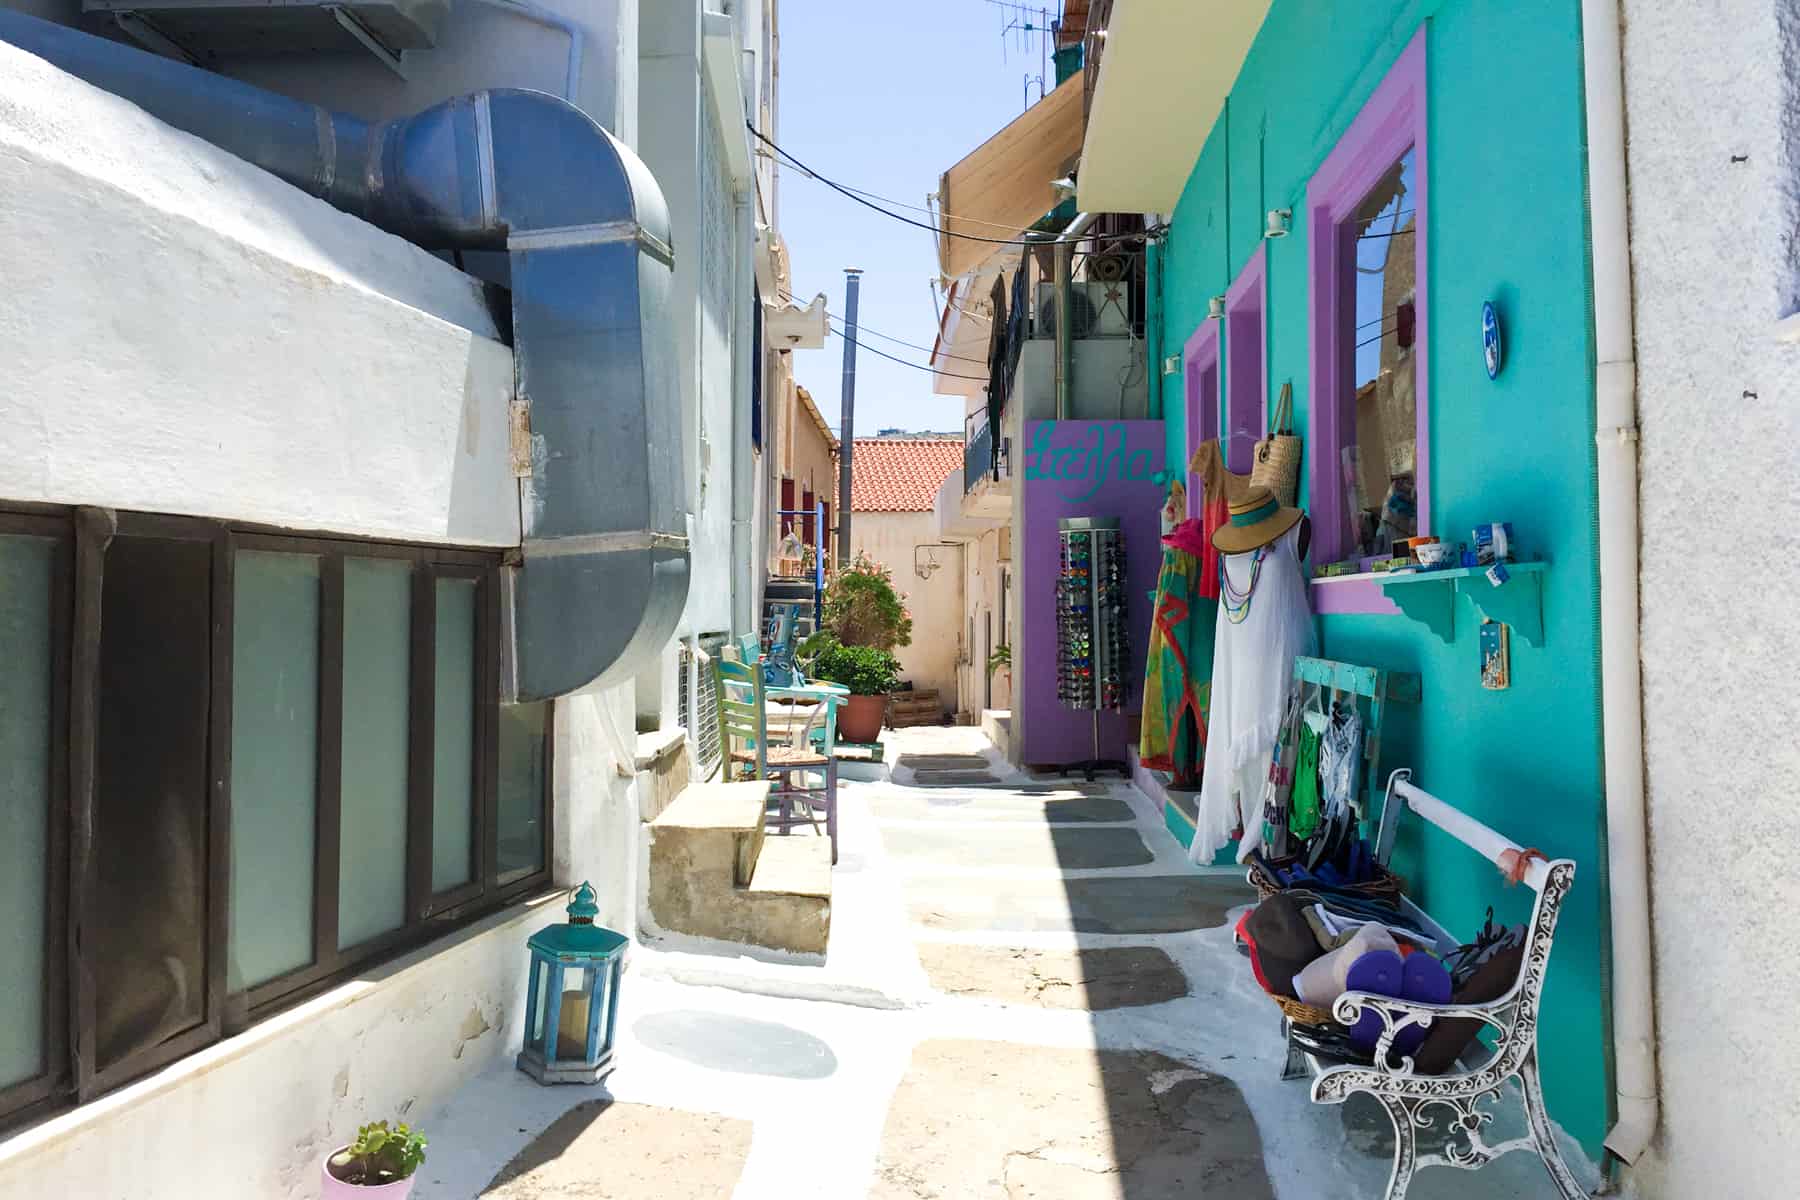 A white and stone walkway in a narrow Greek Island street lined with small white buildings and one wall painted in a bright turquoise